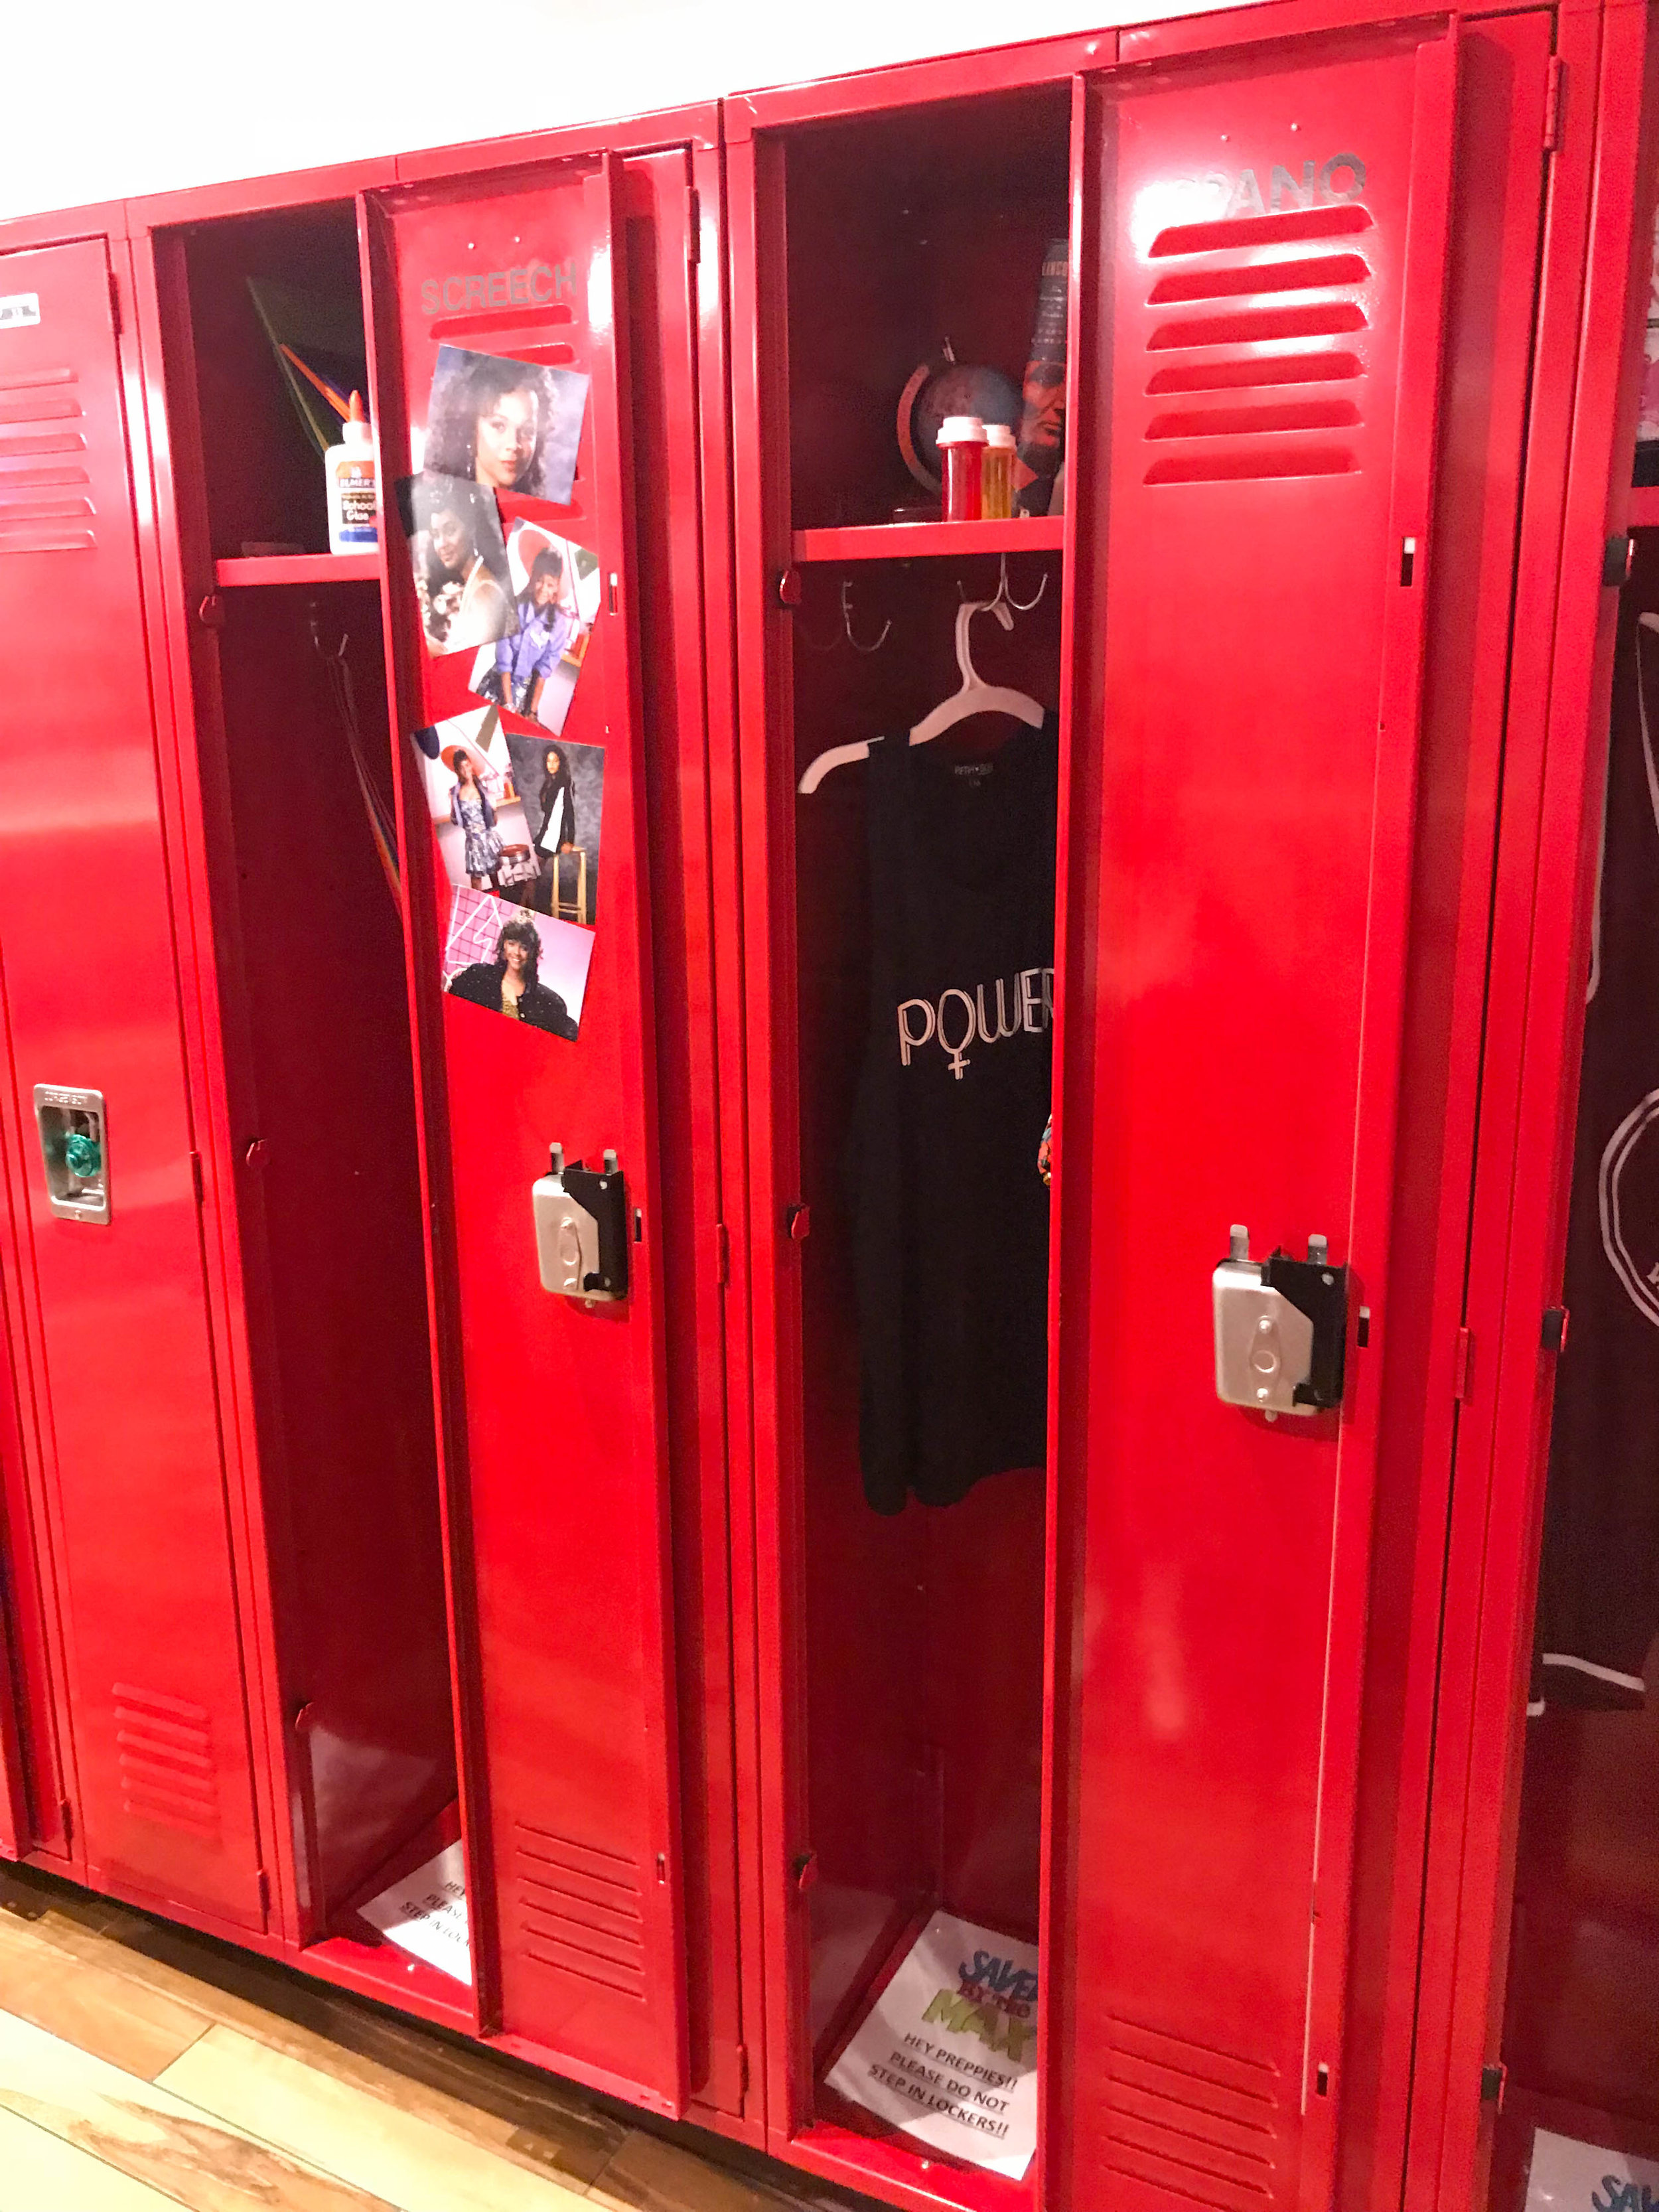 Saved By the Max - Saved by the Bell Pop-up Lockers